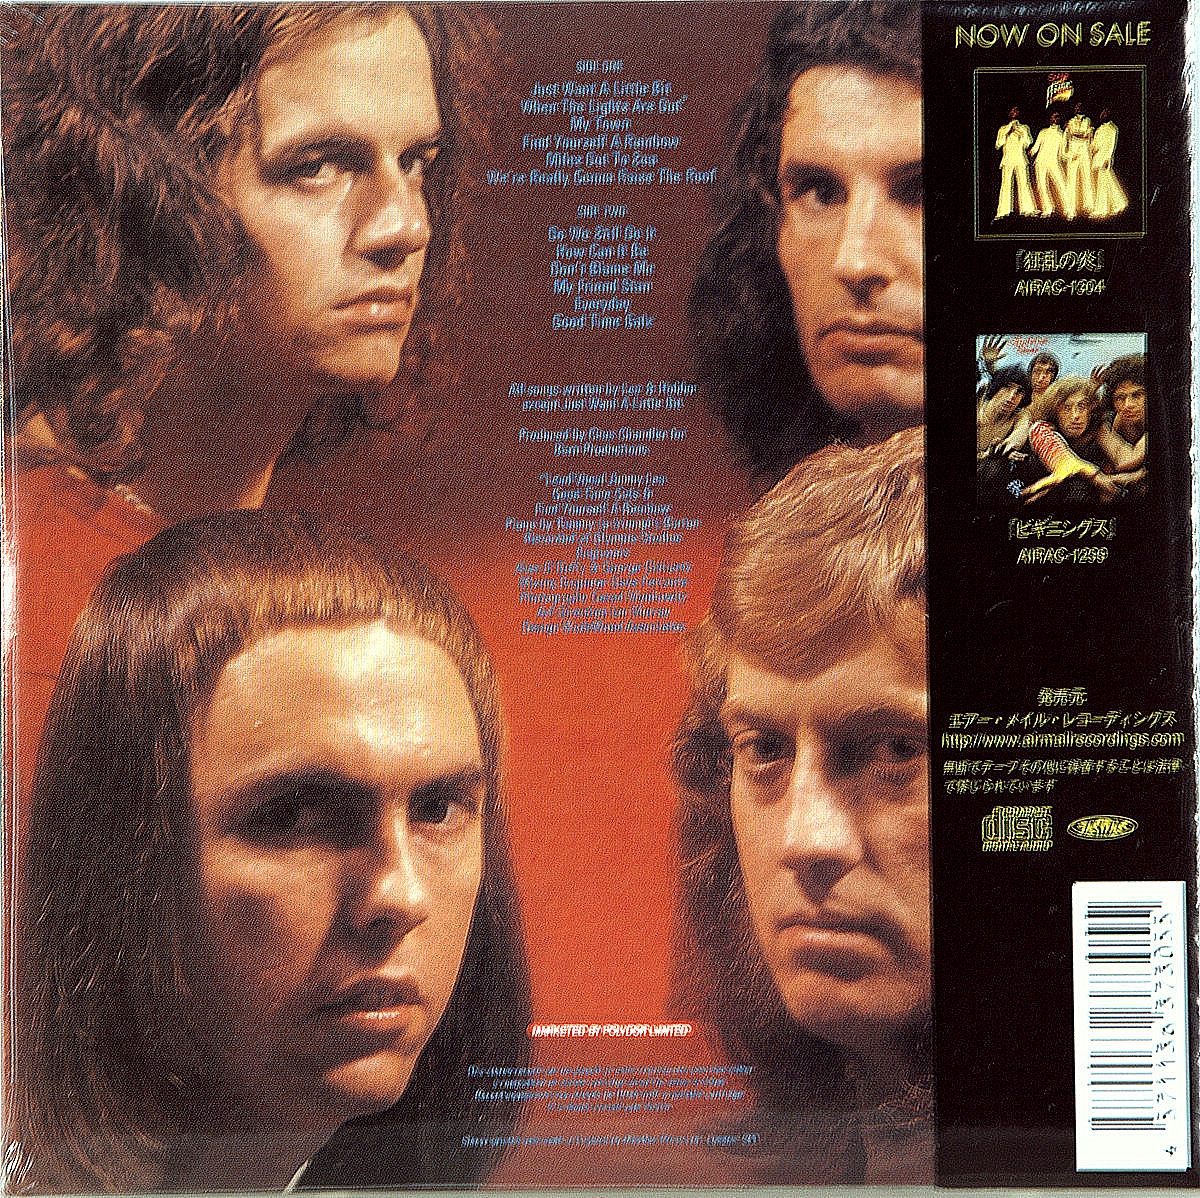 Old new day. Slade old New Borrowed and Blue 1974. Slade old New Borrowed and Blue 1974 обложка. Slade old New Borrowed and Blue 1974 (Vinyl LP). Album Slade old New Borrowed and Blue.